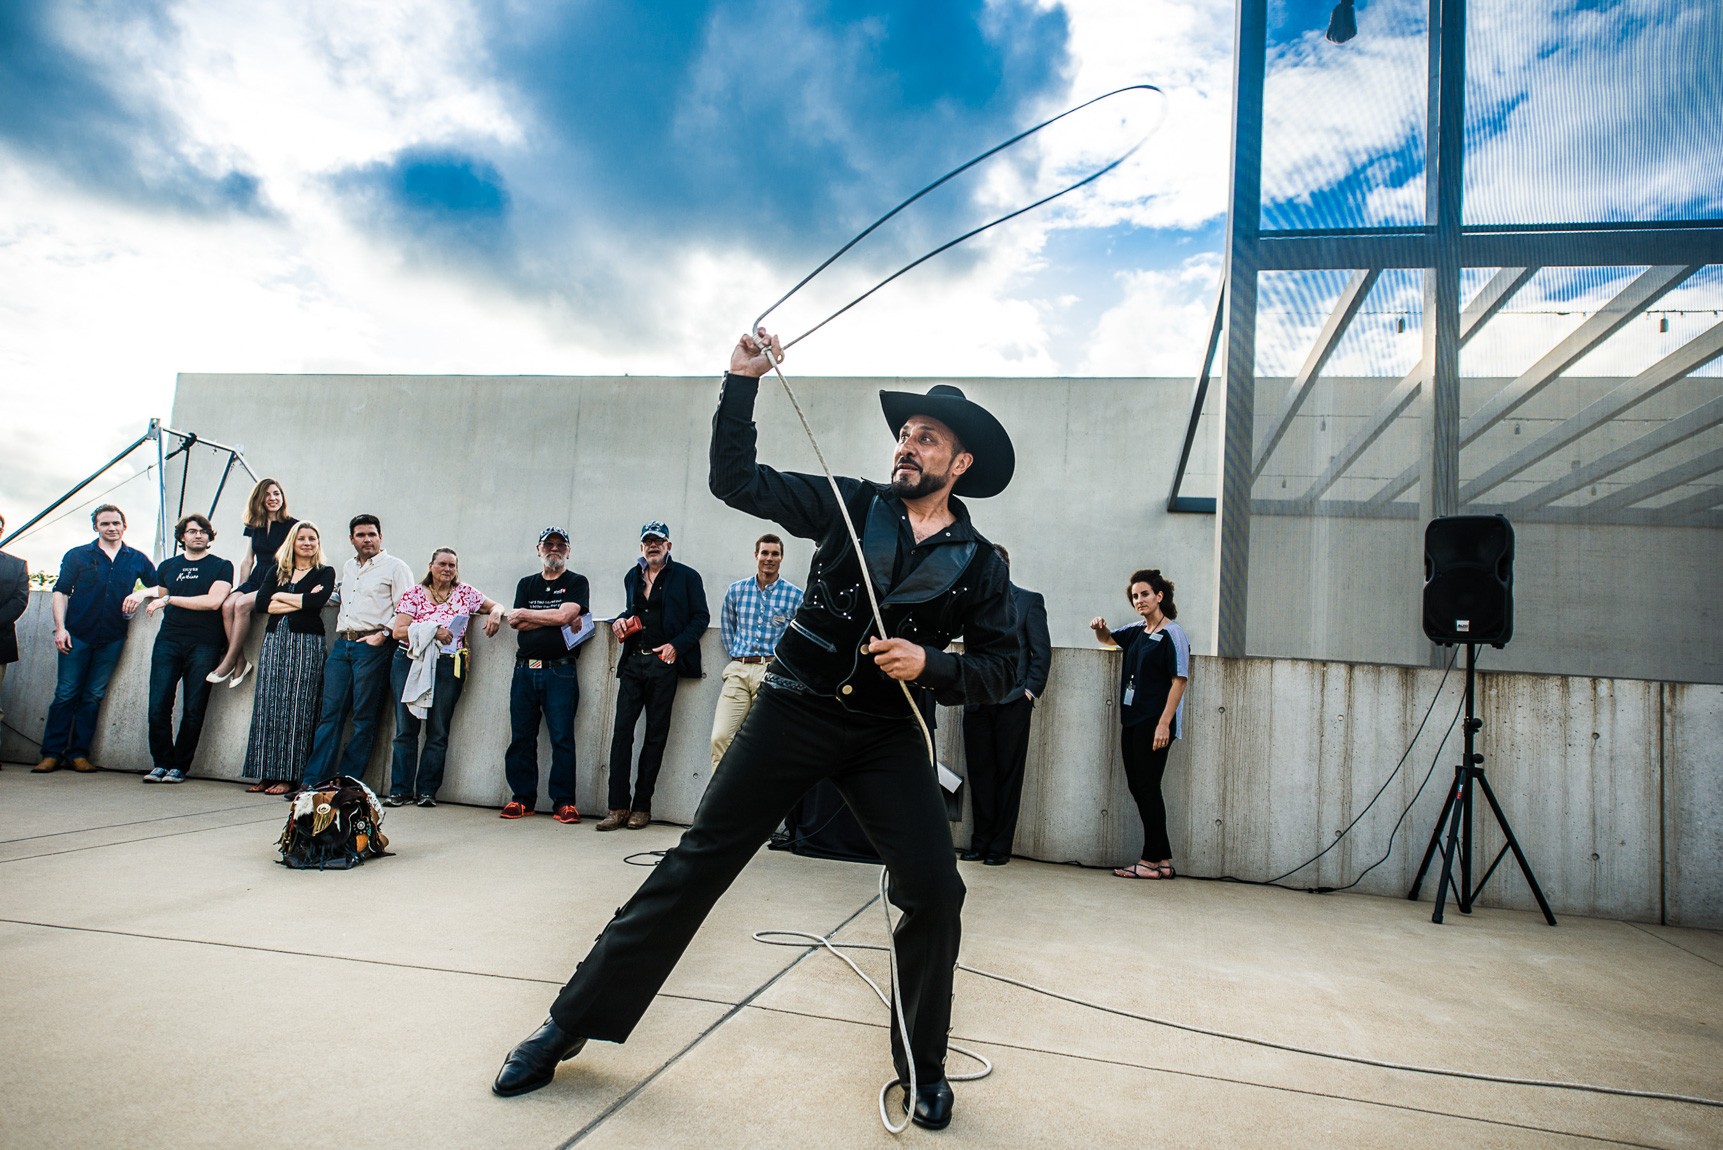 A performer wearing a black western outfit and a cowboy hat swings a lasso for a large audience in the Courtyard.